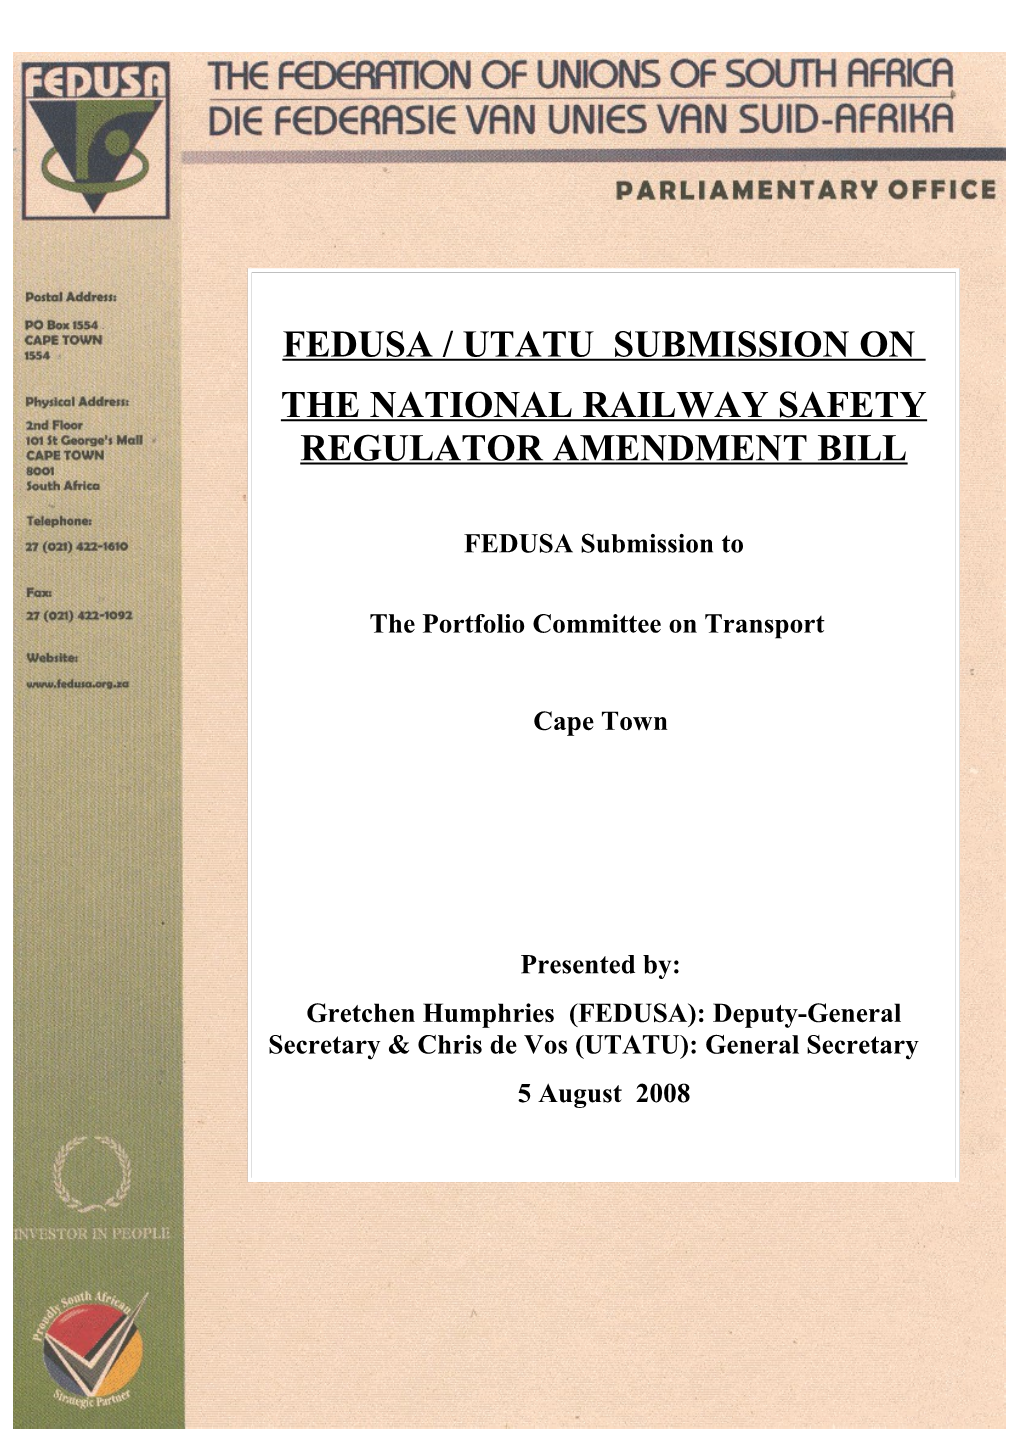 Submission to Portfolio Committee on Transport on the National Railway Safety Regulator